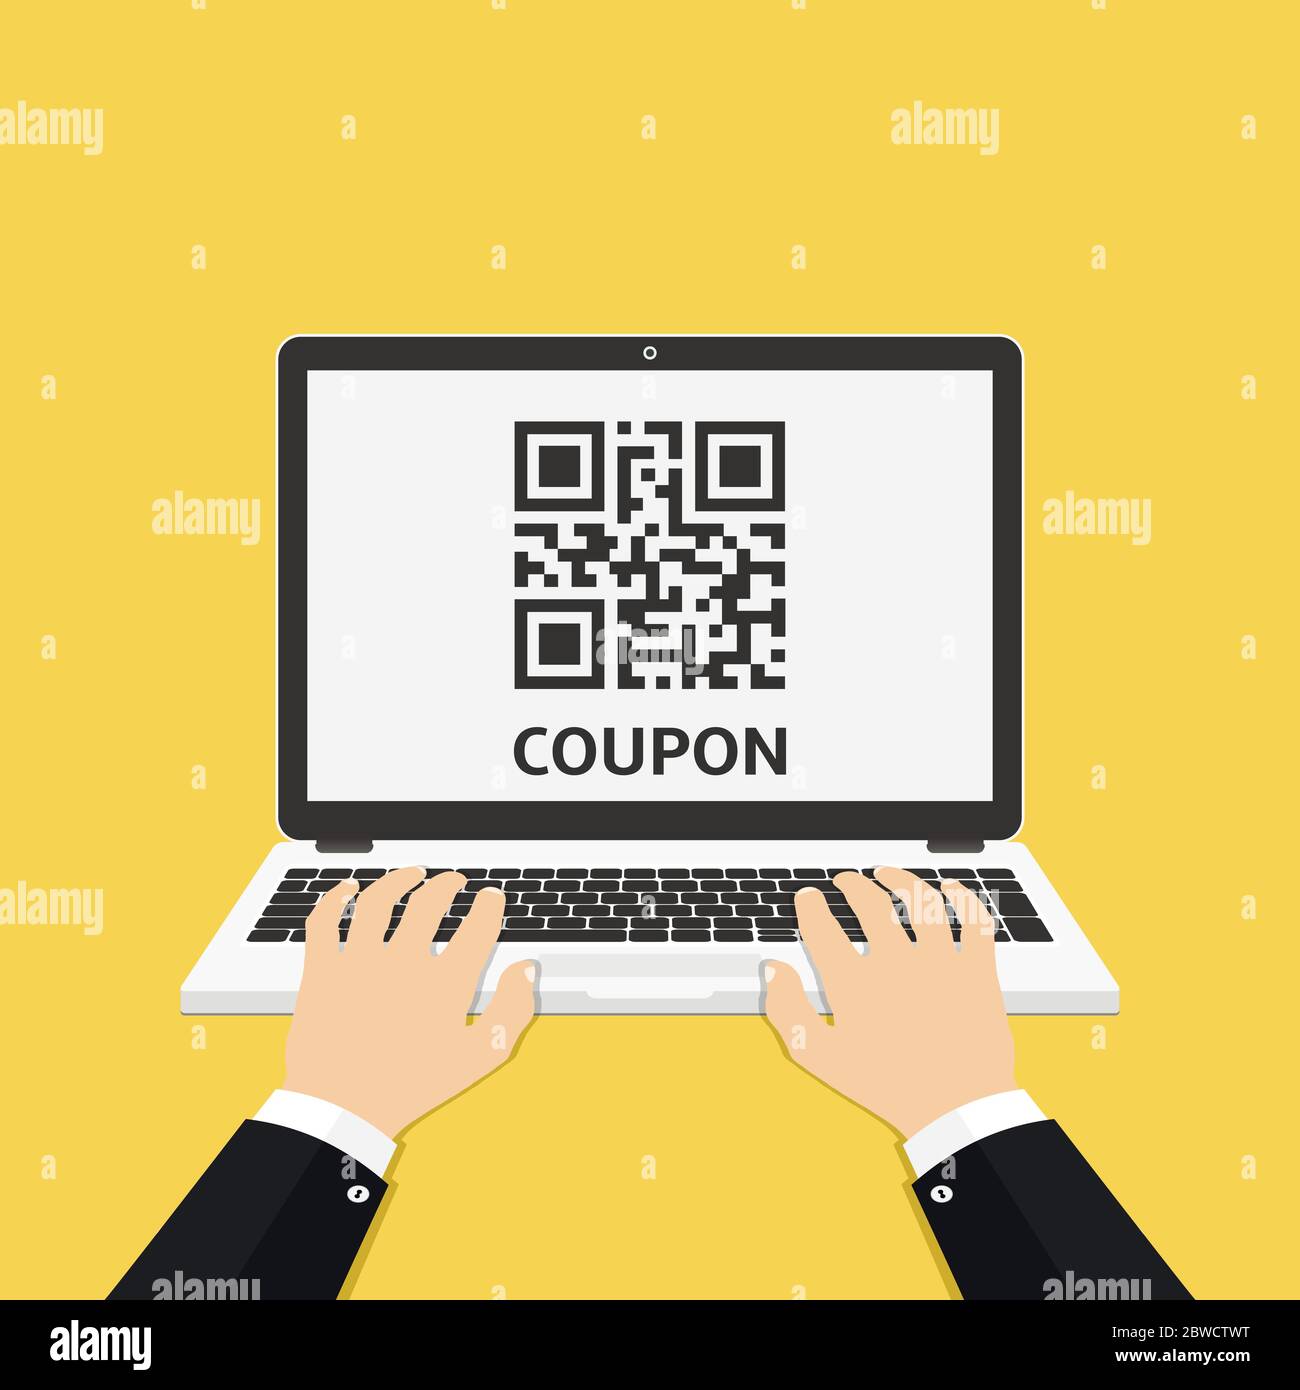 https://c8.alamy.com/comp/2BWCTWT/man-hands-using-laptop-with-coupon-qr-code-on-screen-vector-illustration-2BWCTWT.jpg